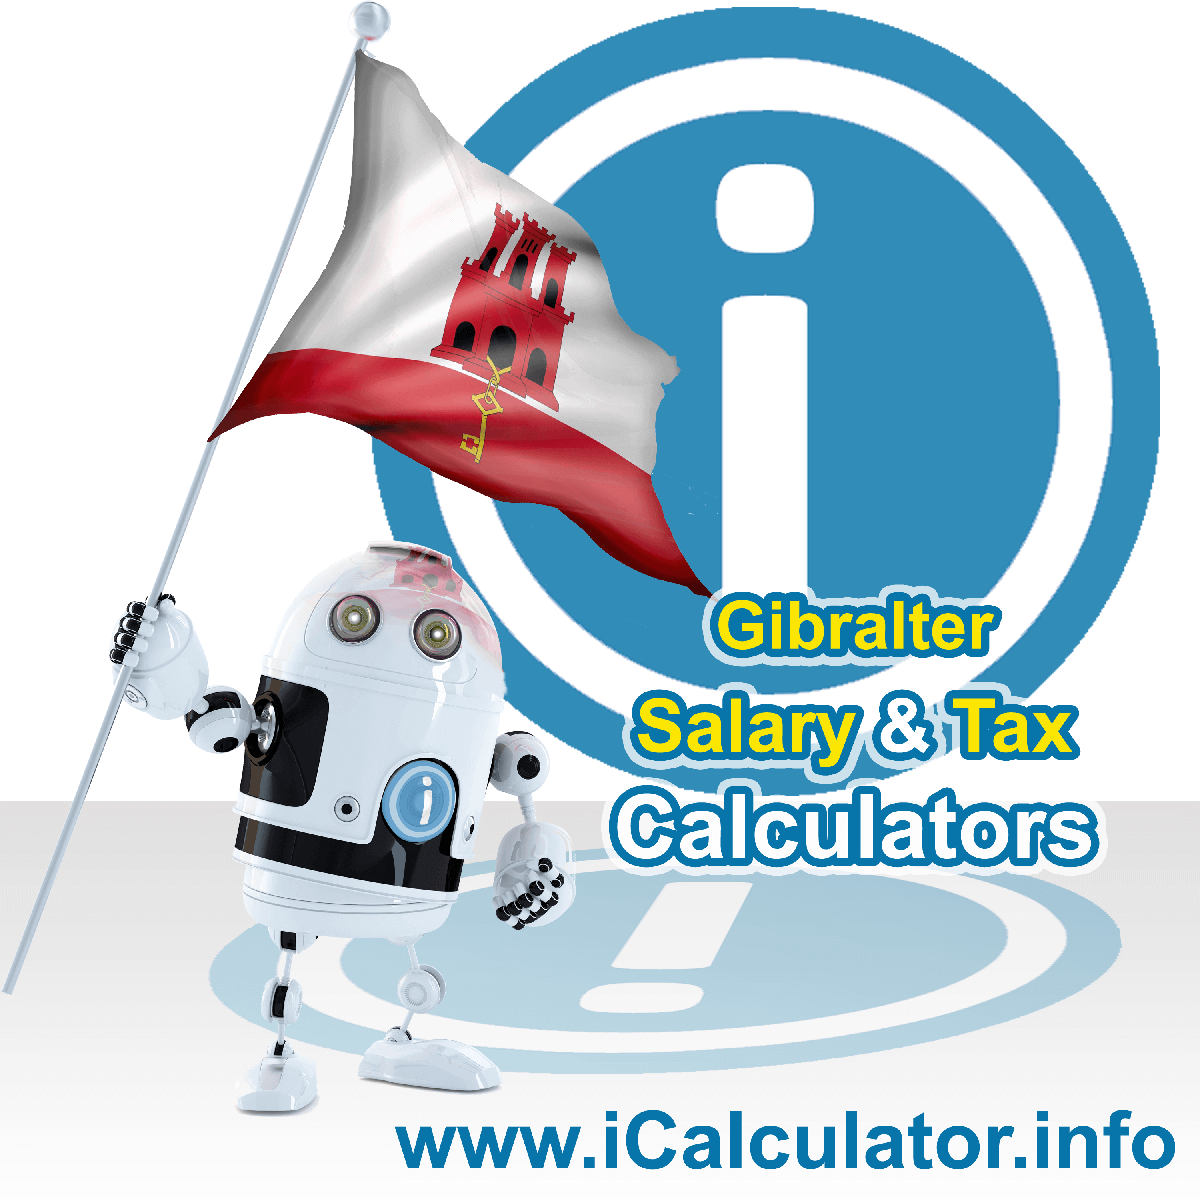 Gibraltar Salary Calculator. This image shows the Gibraltarese flag and information relating to the tax formula for the Gibraltar Tax Calculator